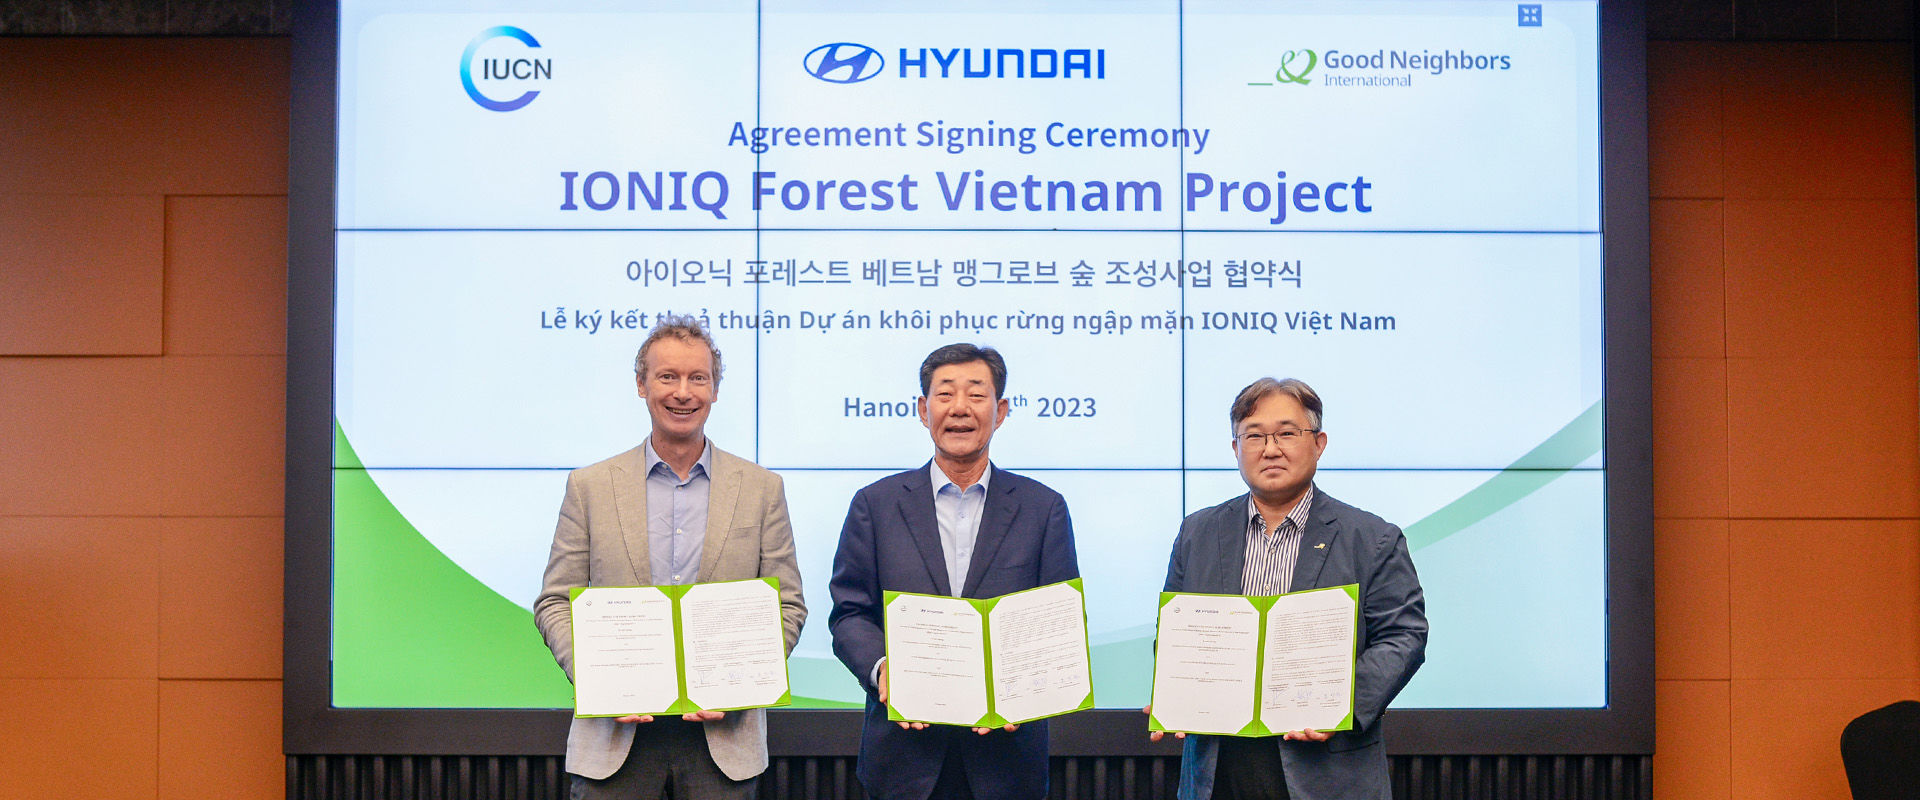 Hyundai Motor Joins Hands with IUCN to Drive Mangrove Reforestation in Vietnam’s Mekong Delta				